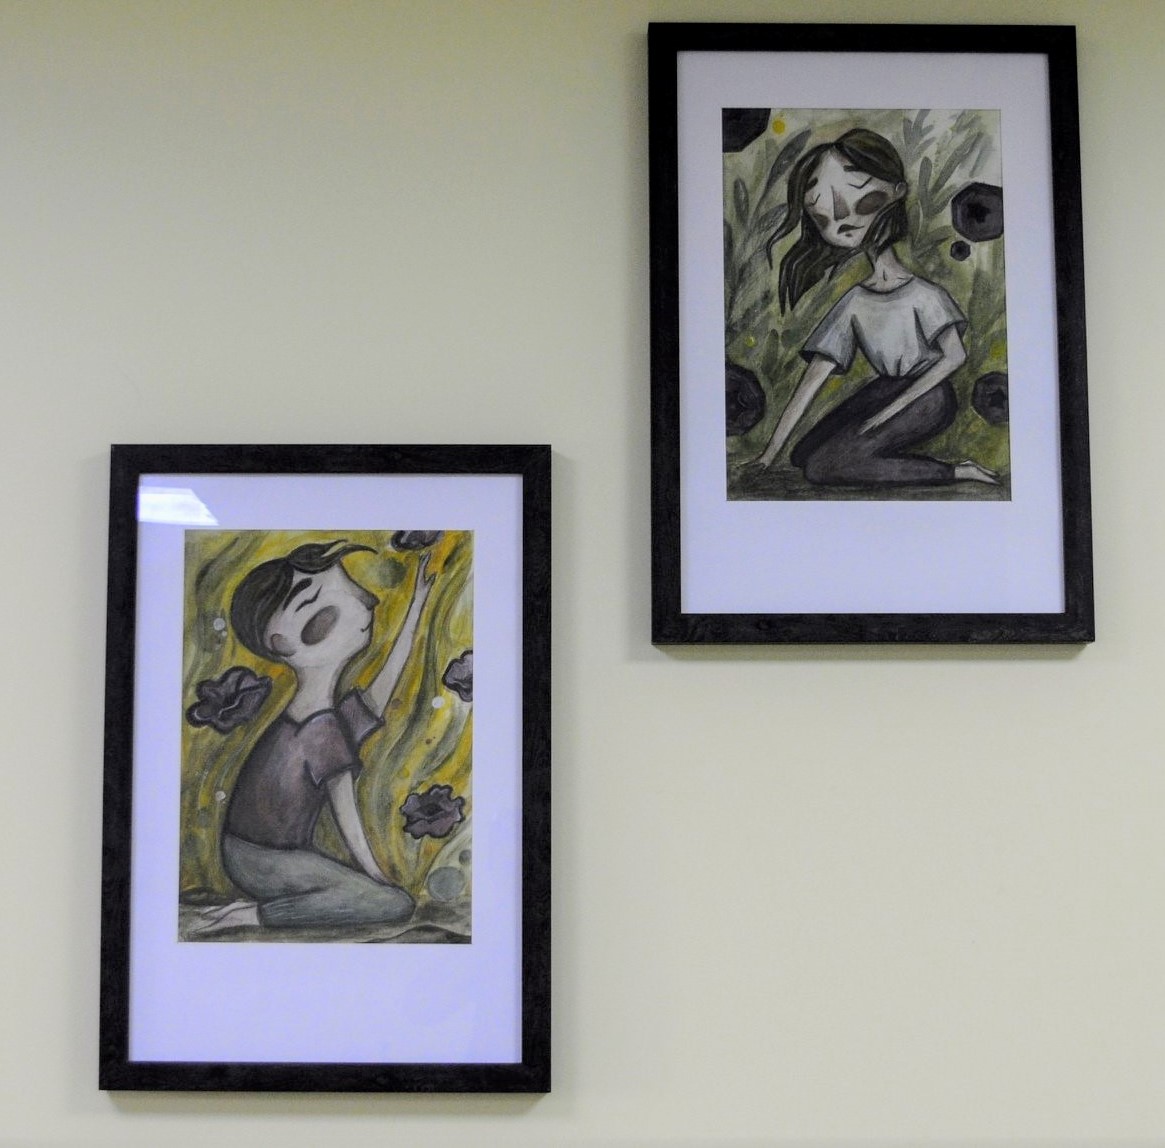 I thank Solomea for her magnificent drawings which she gave to the palliative care unit and which now adorn the walls of the unit.